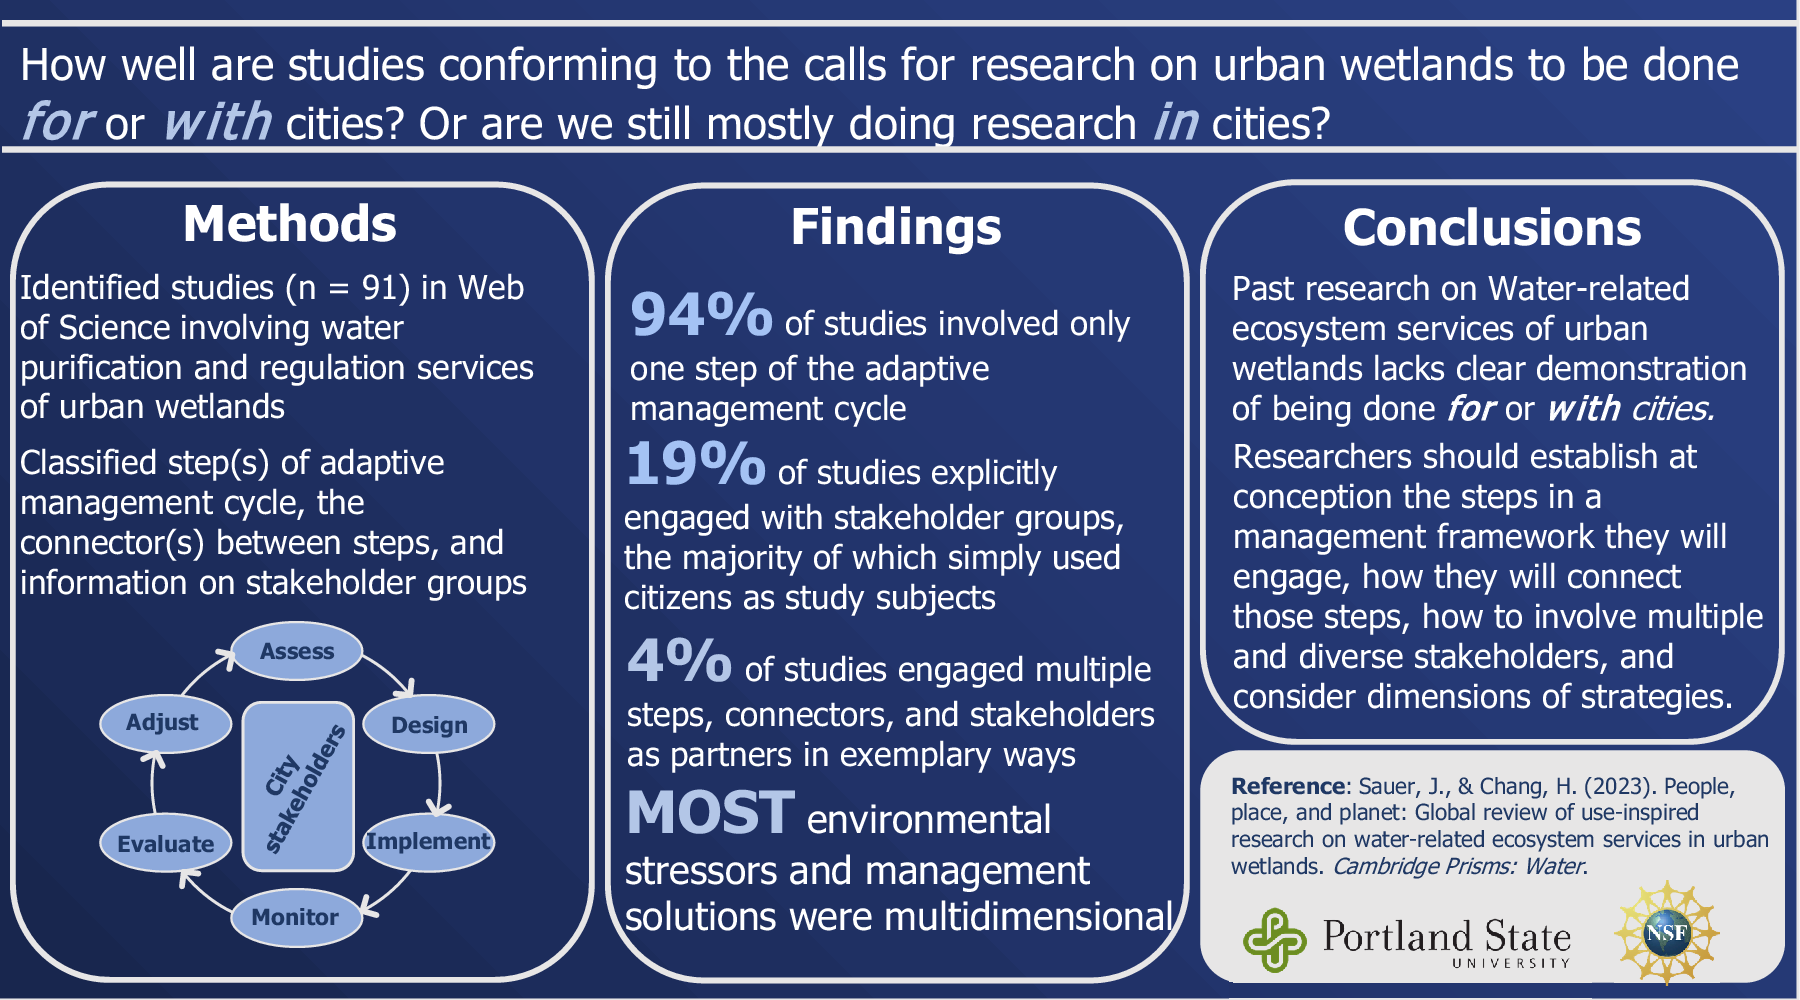 graphical abstract for People, place, and planet: Global review of use-inspired research on water-related ecosystem services in urban wetlands - open in full screen